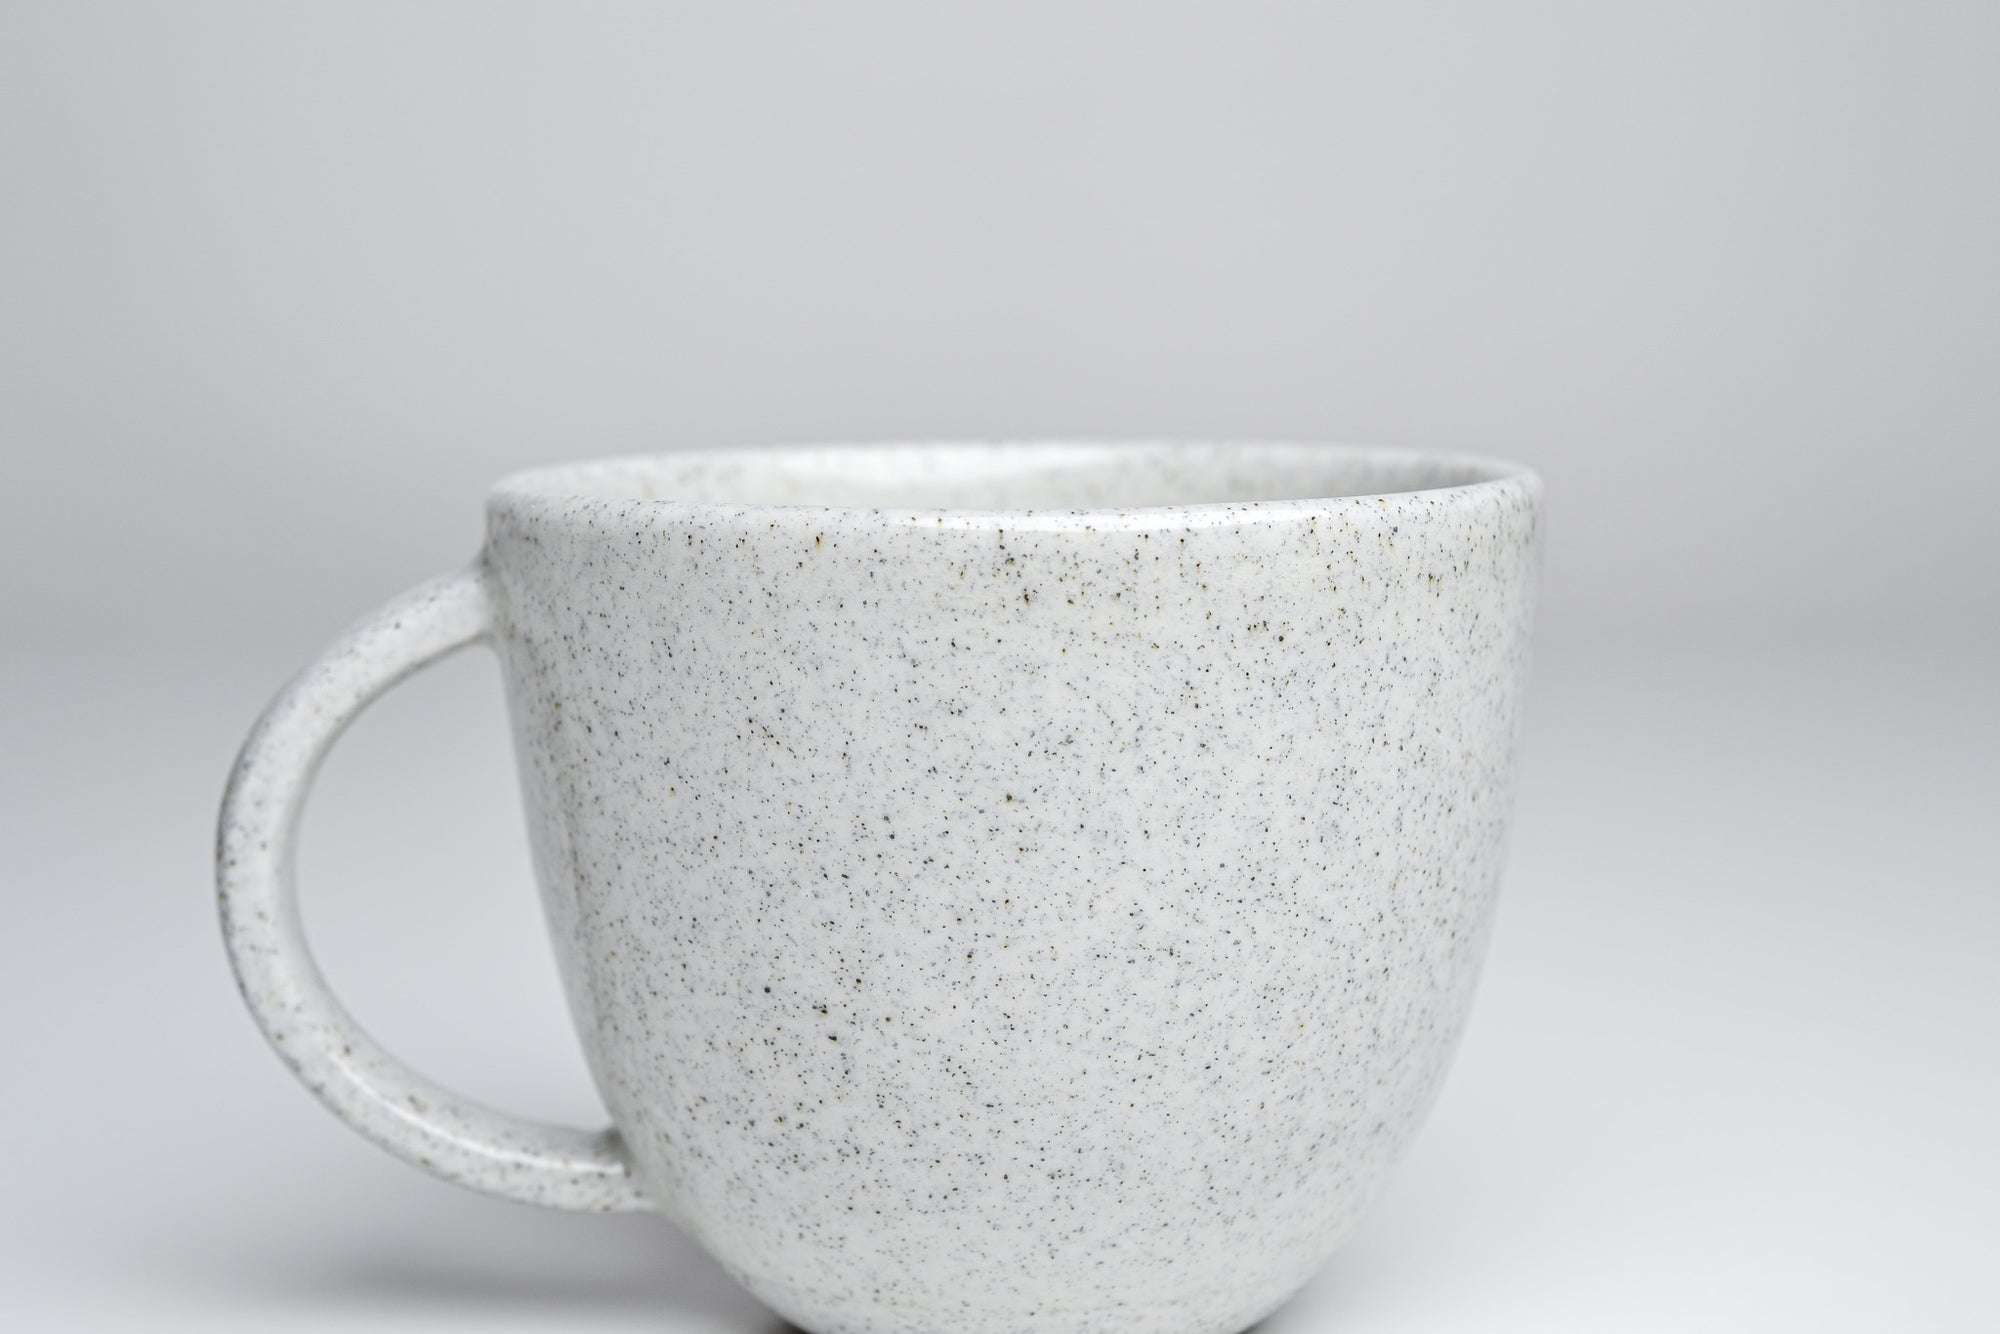 Simple cup with dots